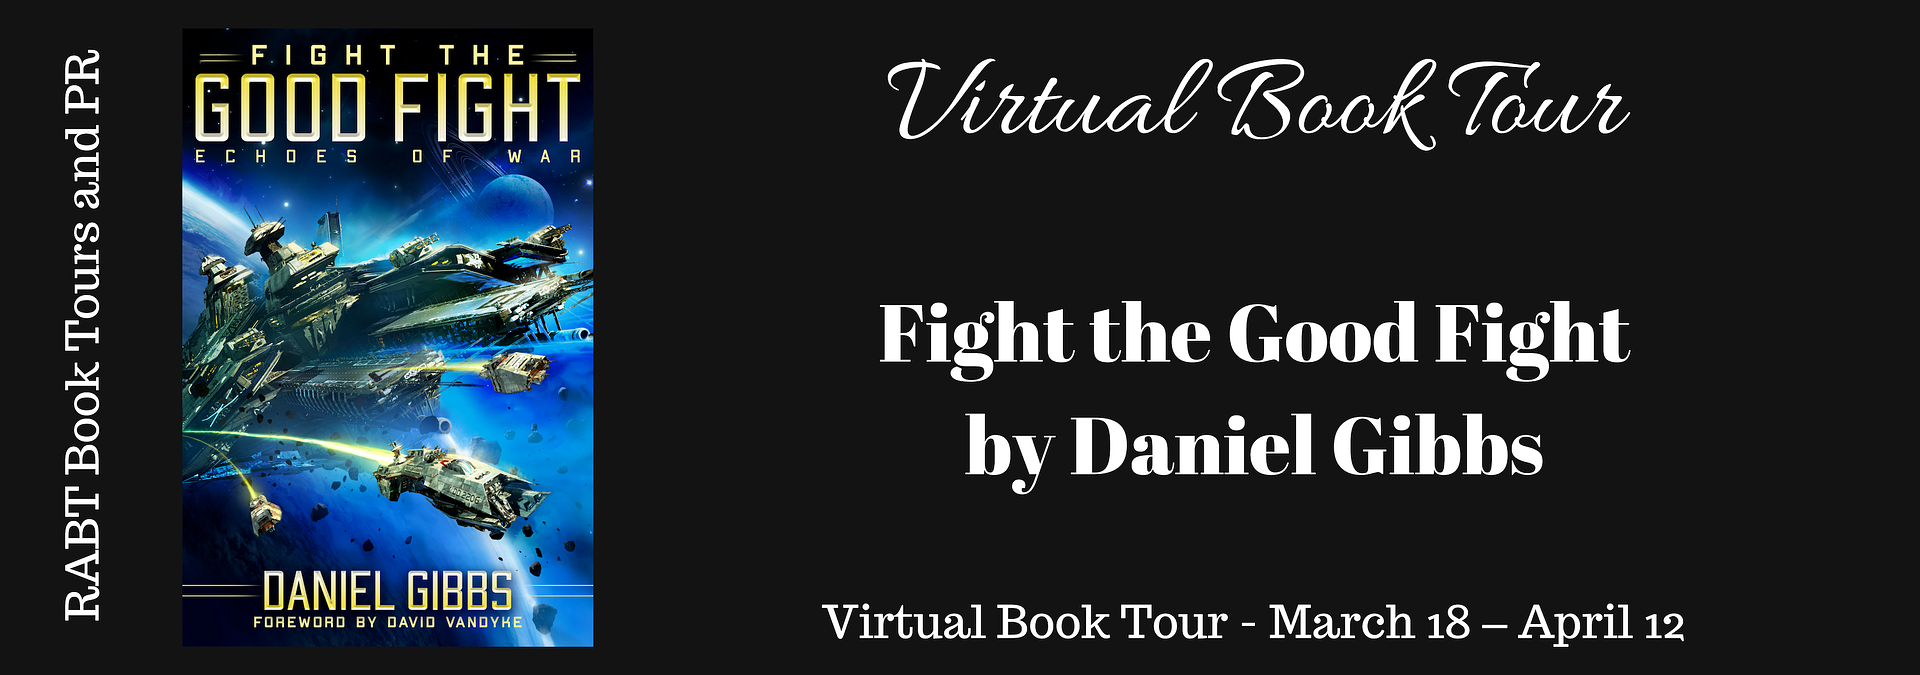 Virtual Book Tour: Fight the Good Fight by Daniel Gibbs #scifi #review @RABTBookTours